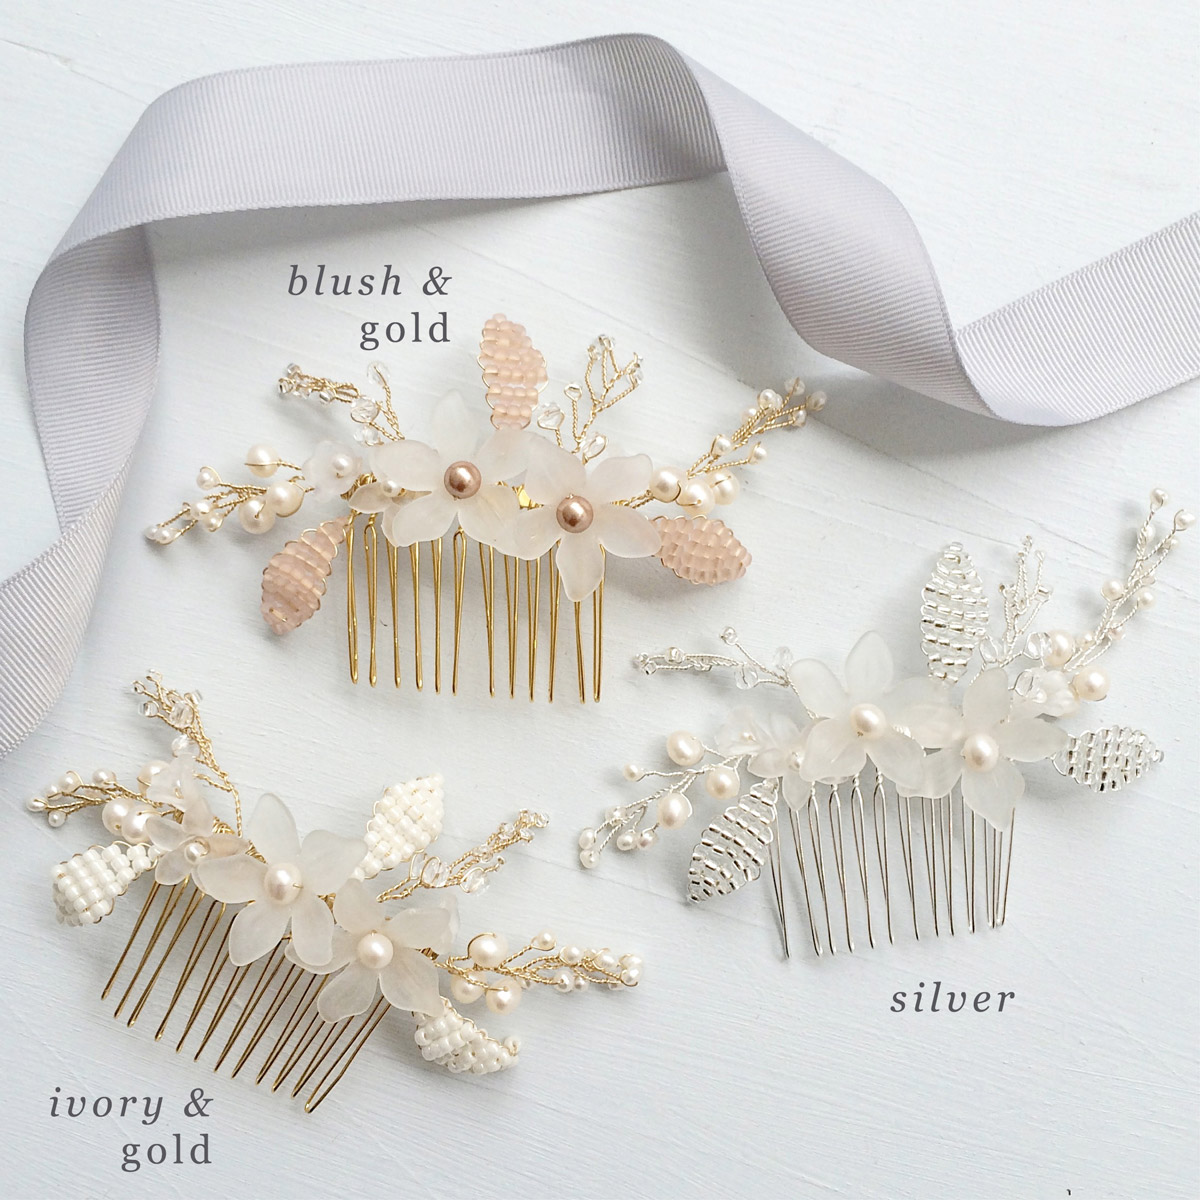 Finely handcrafted wedding accessories from Britten Weddings